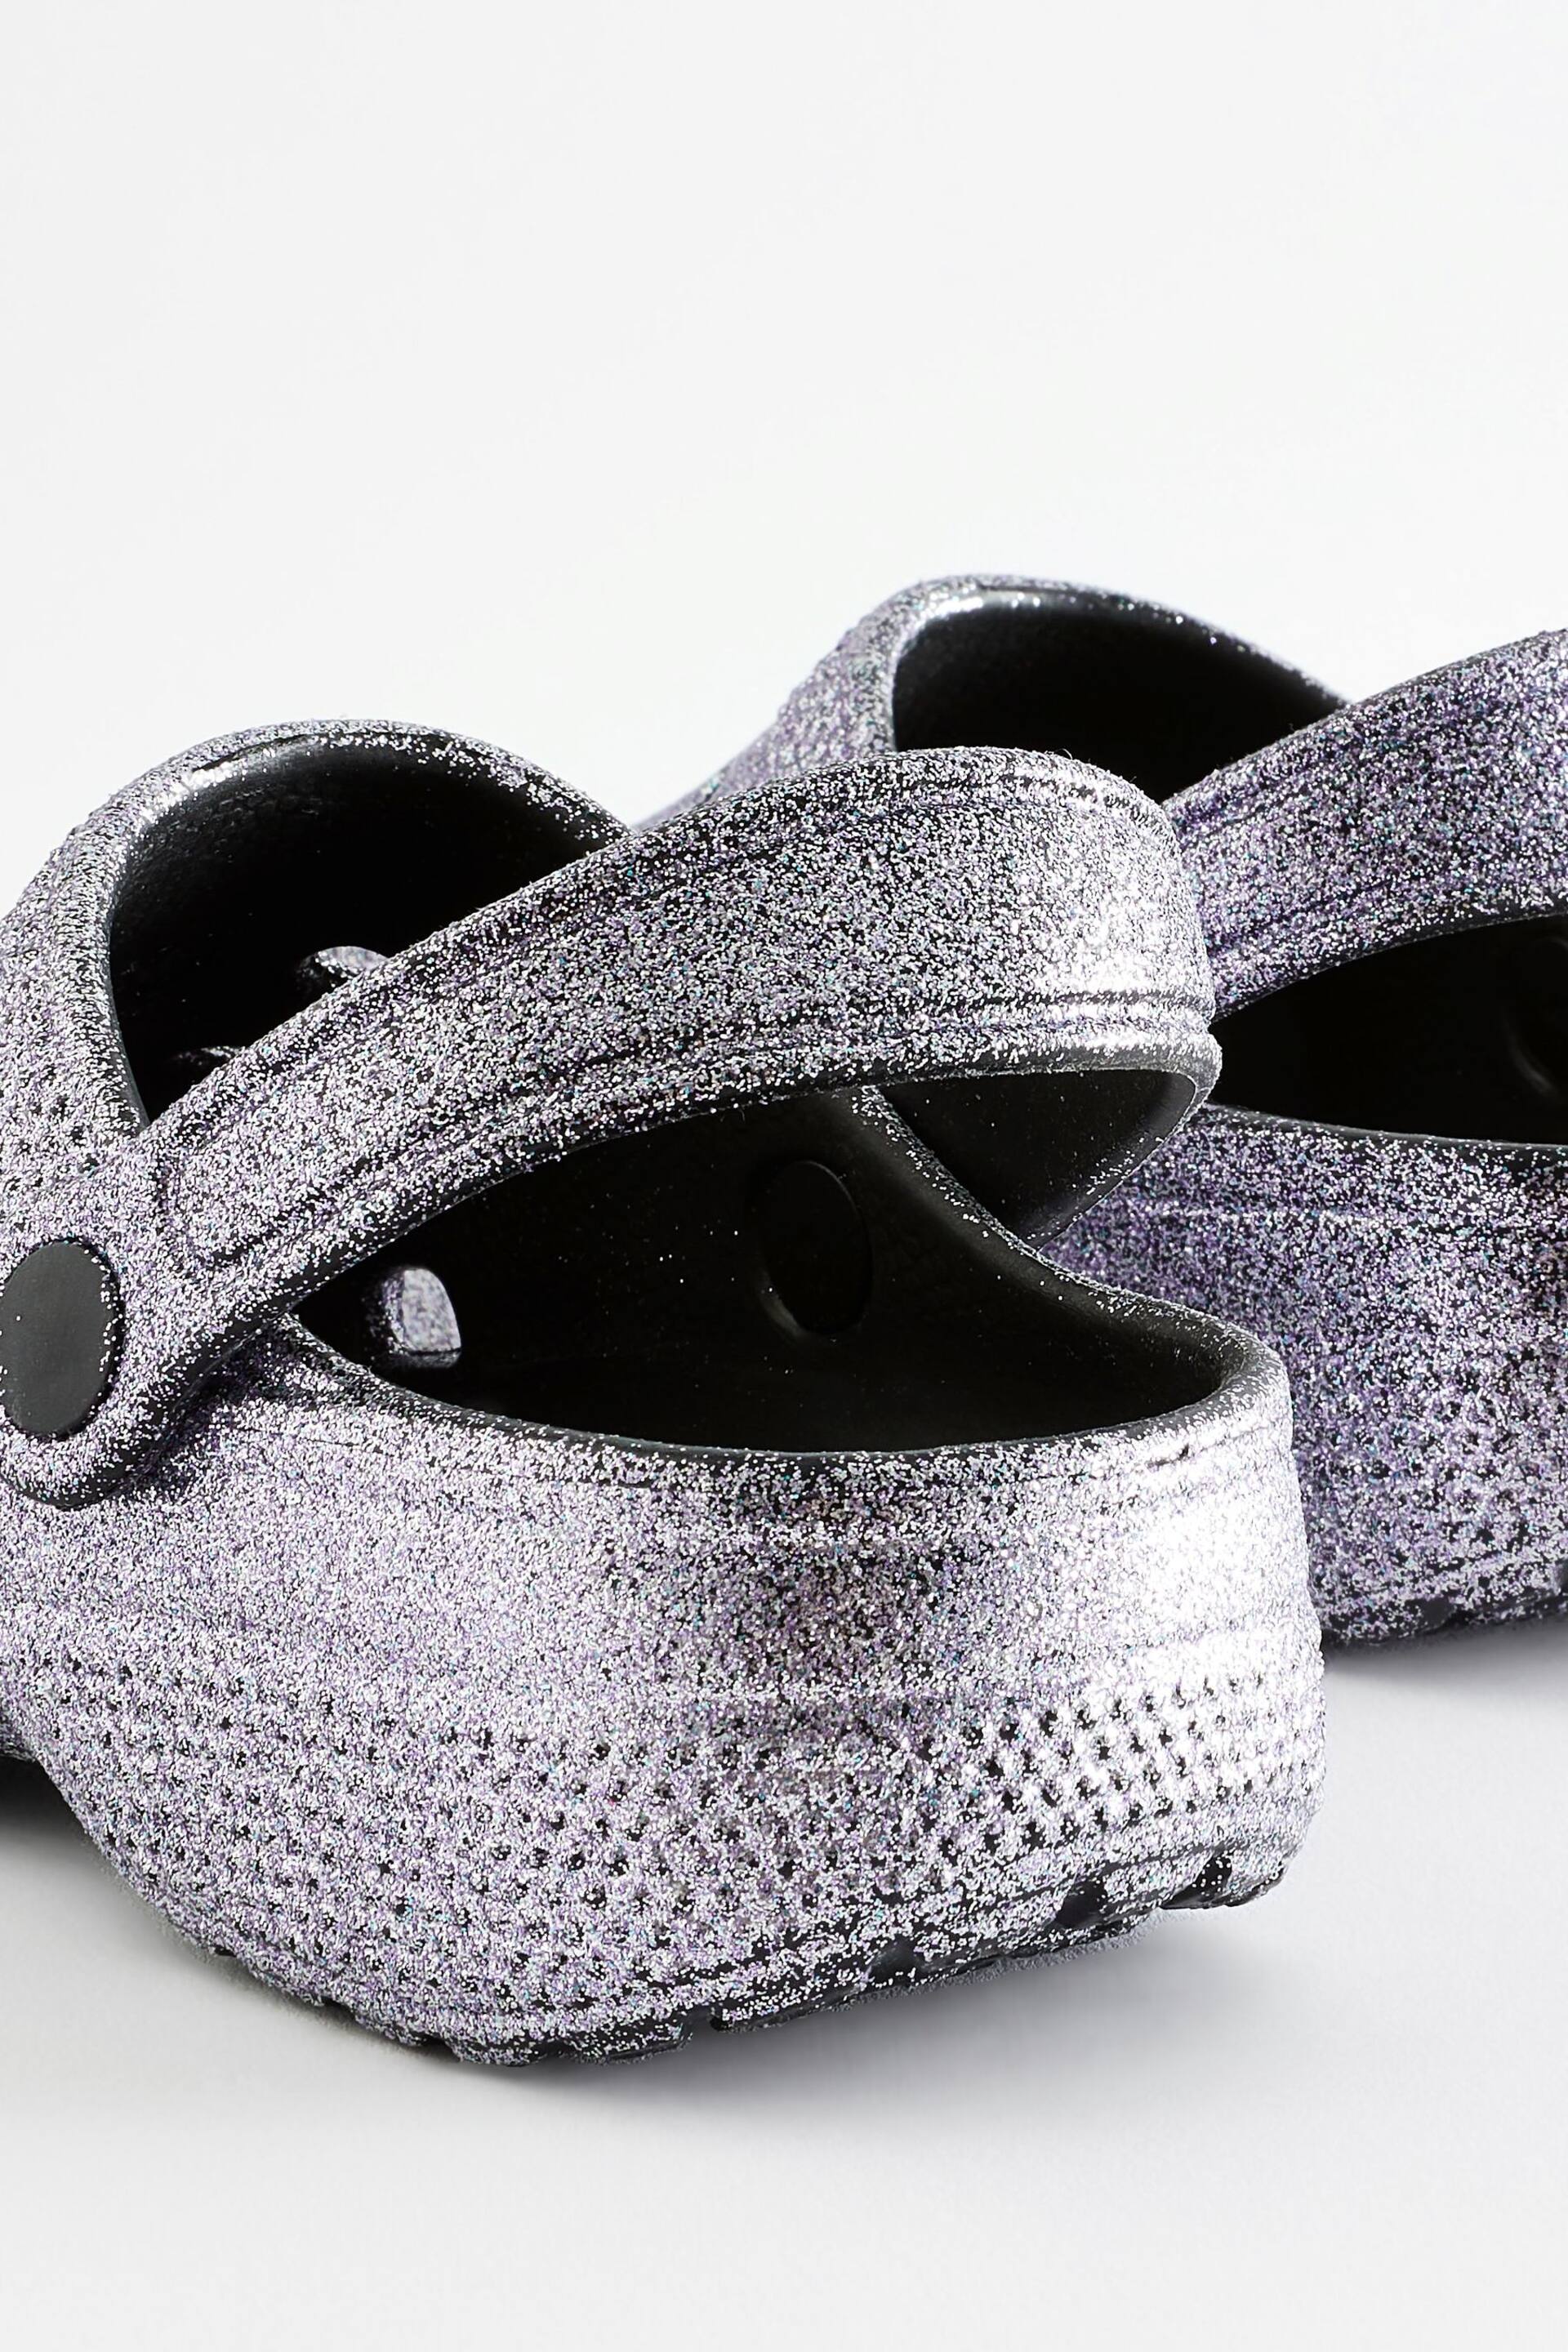 Silver Glitter Clogs - Image 10 of 10